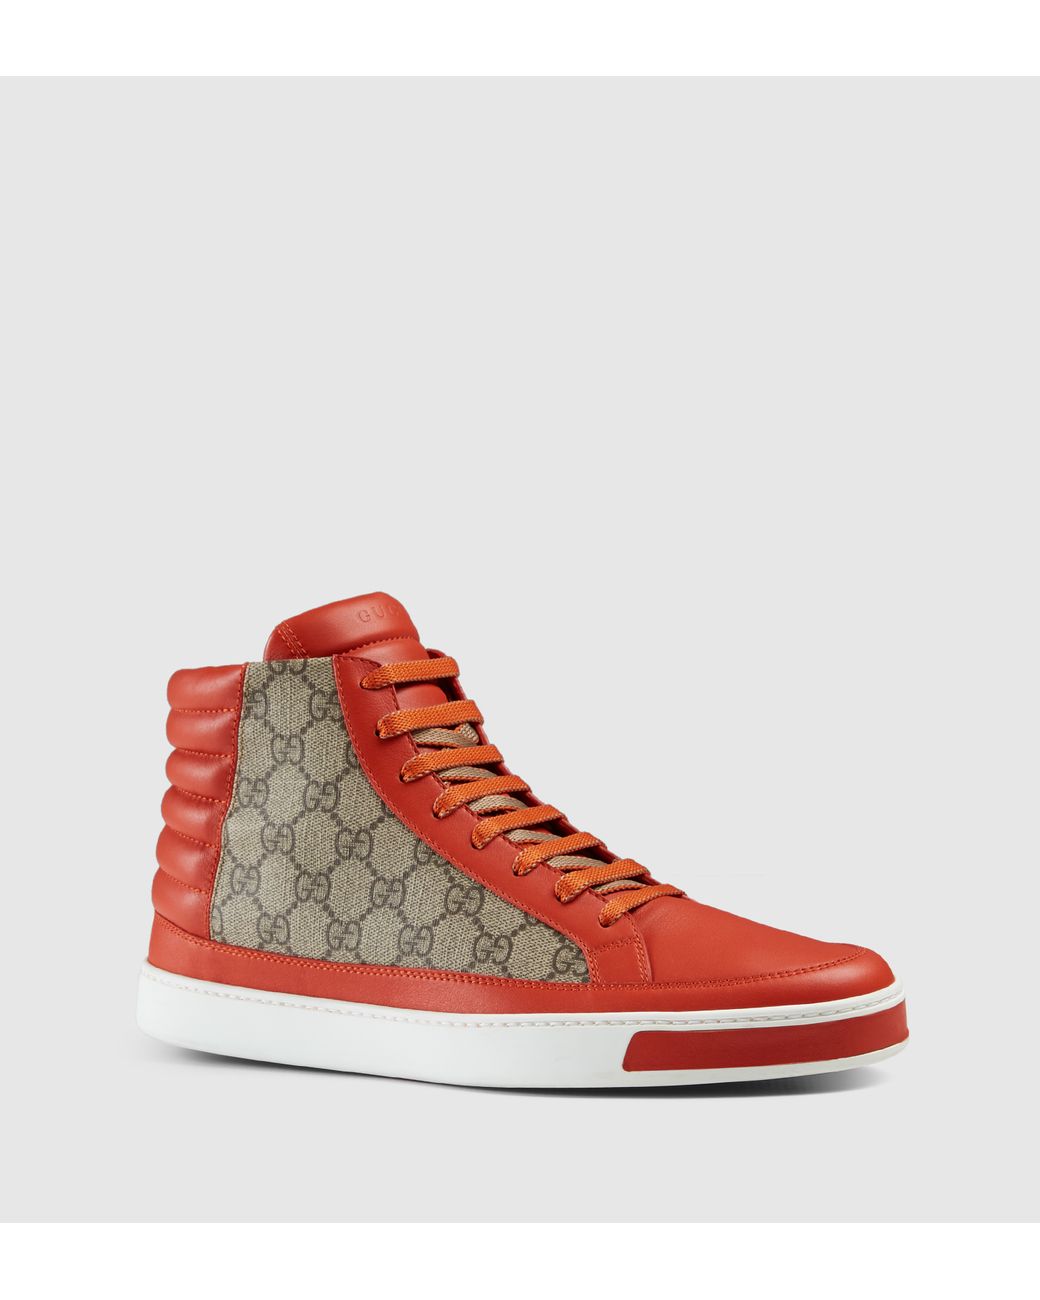 Gucci Gg Supreme And Leather High-top Sneaker in Orange for Men | Lyst